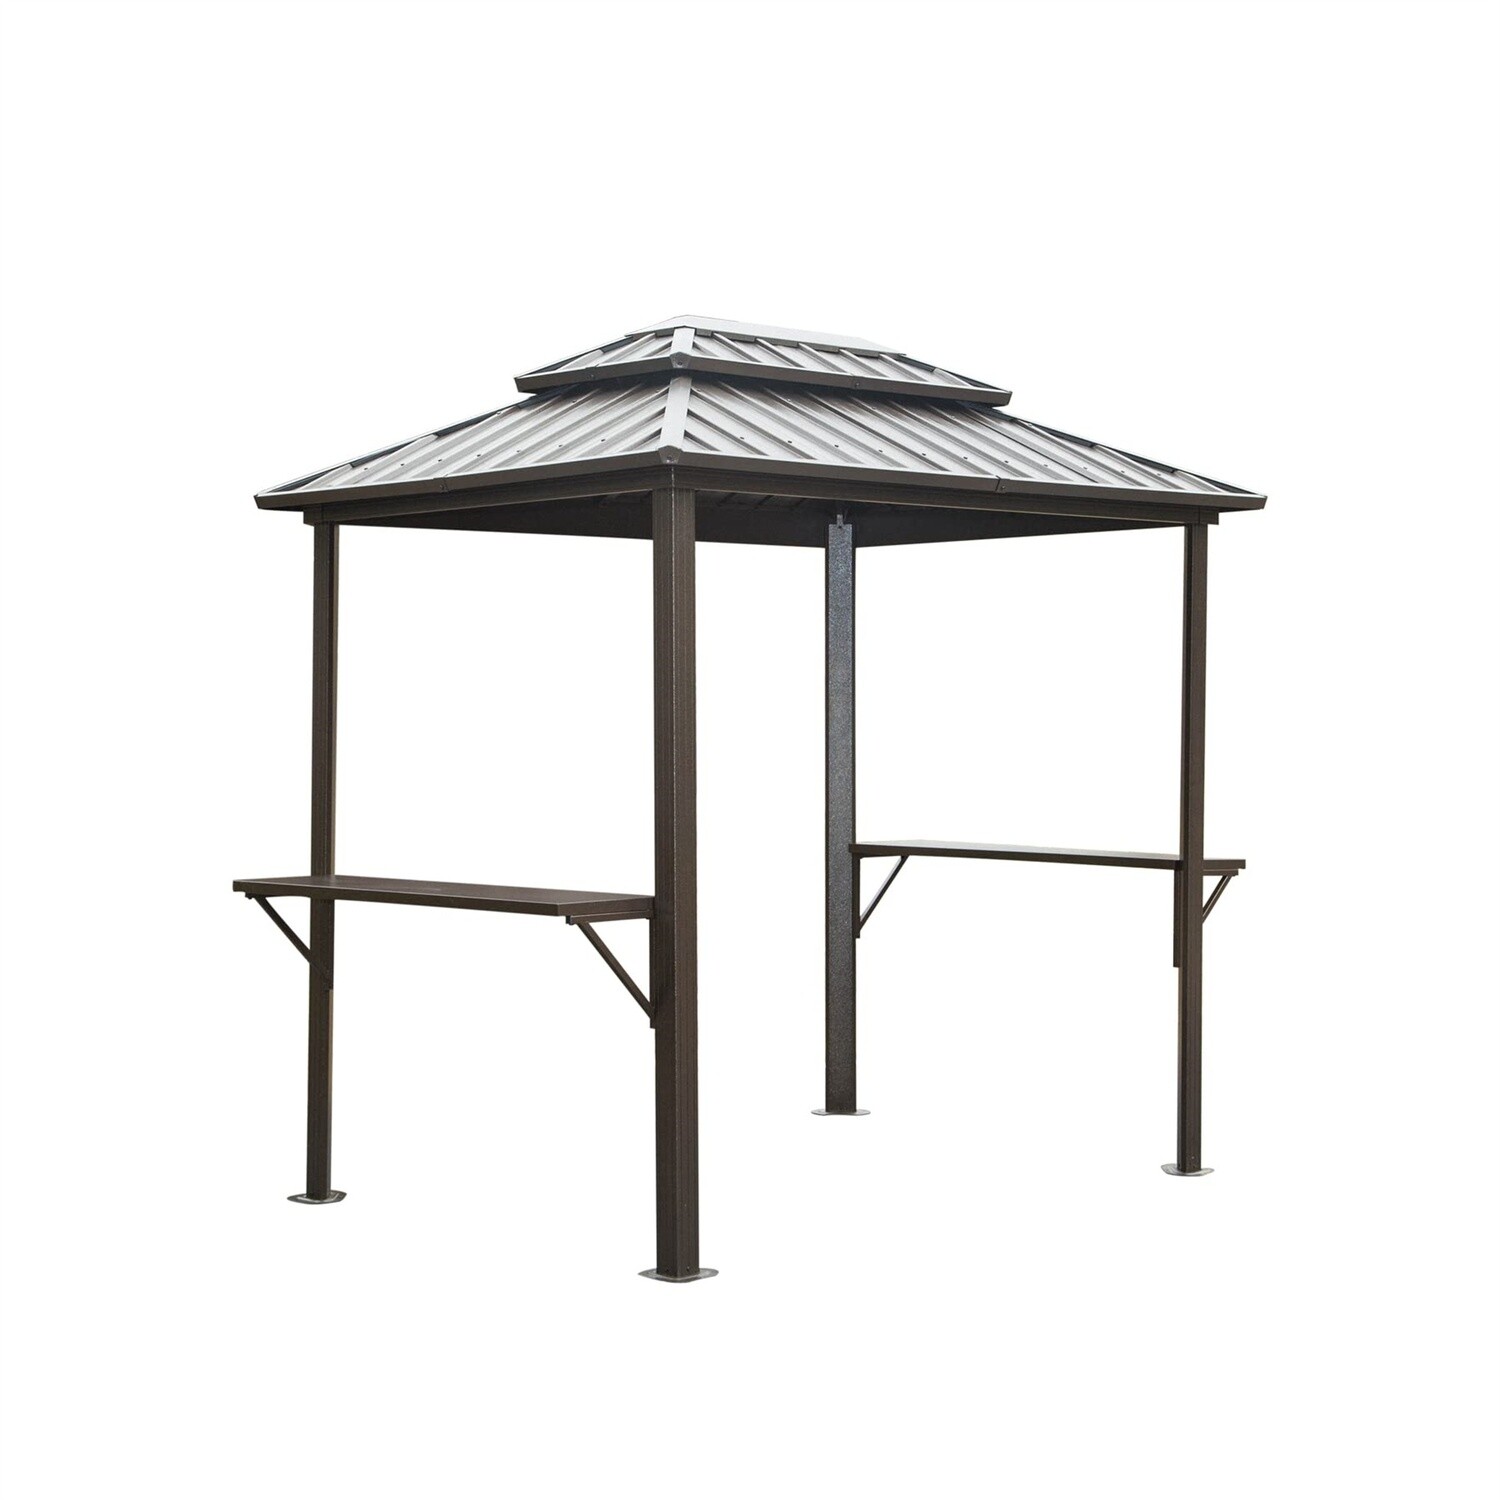 Grill Gazebo 8' × 6' FT Aluminum BBQ Gazebo Outdoor Metal Frame with Shelves Serving Tables, Permanent Double Roof Hard Top Gazebos for Patio Lawn Deck Backyard and Garden (Brown), Options: Brown+Metal11